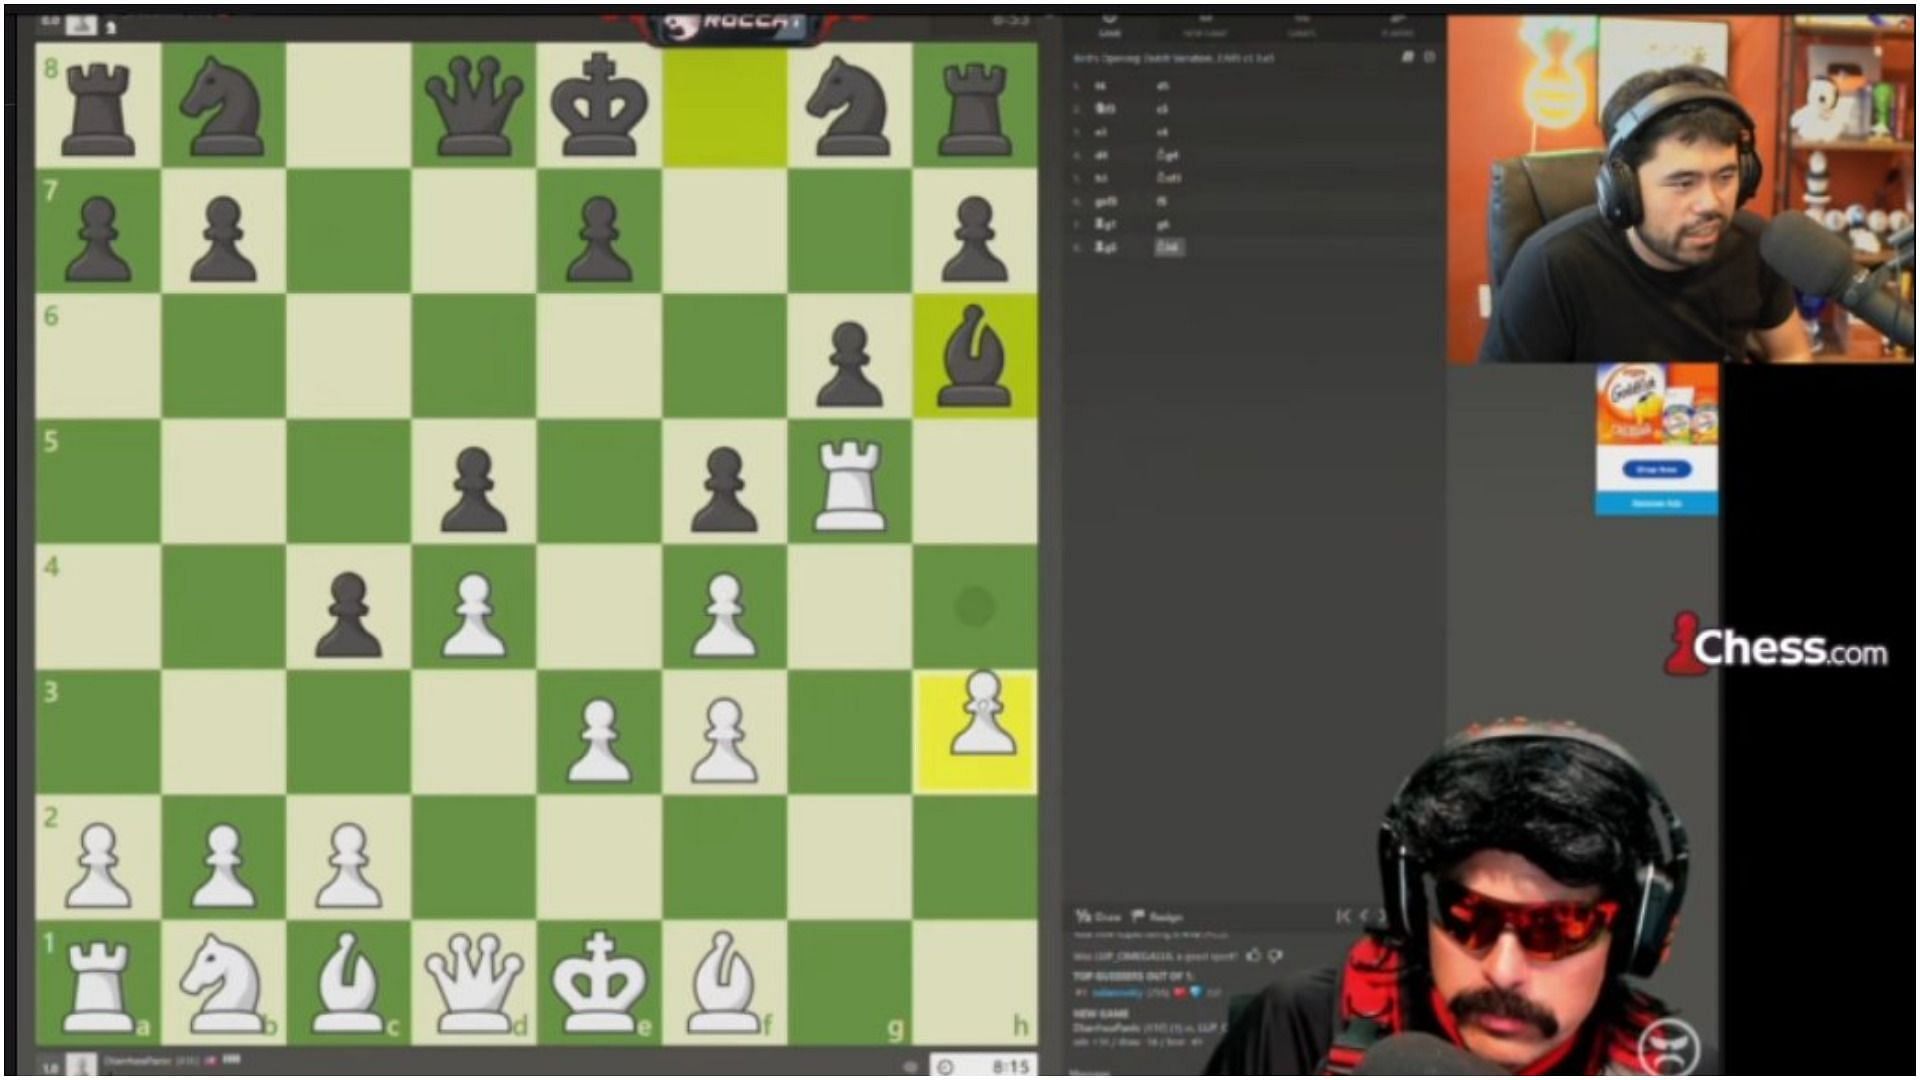 GMHikaru watches chess match between Dr DisRespect and DrLupo, gives compliments to the two-time (Image via Twitter/GMHikaru)